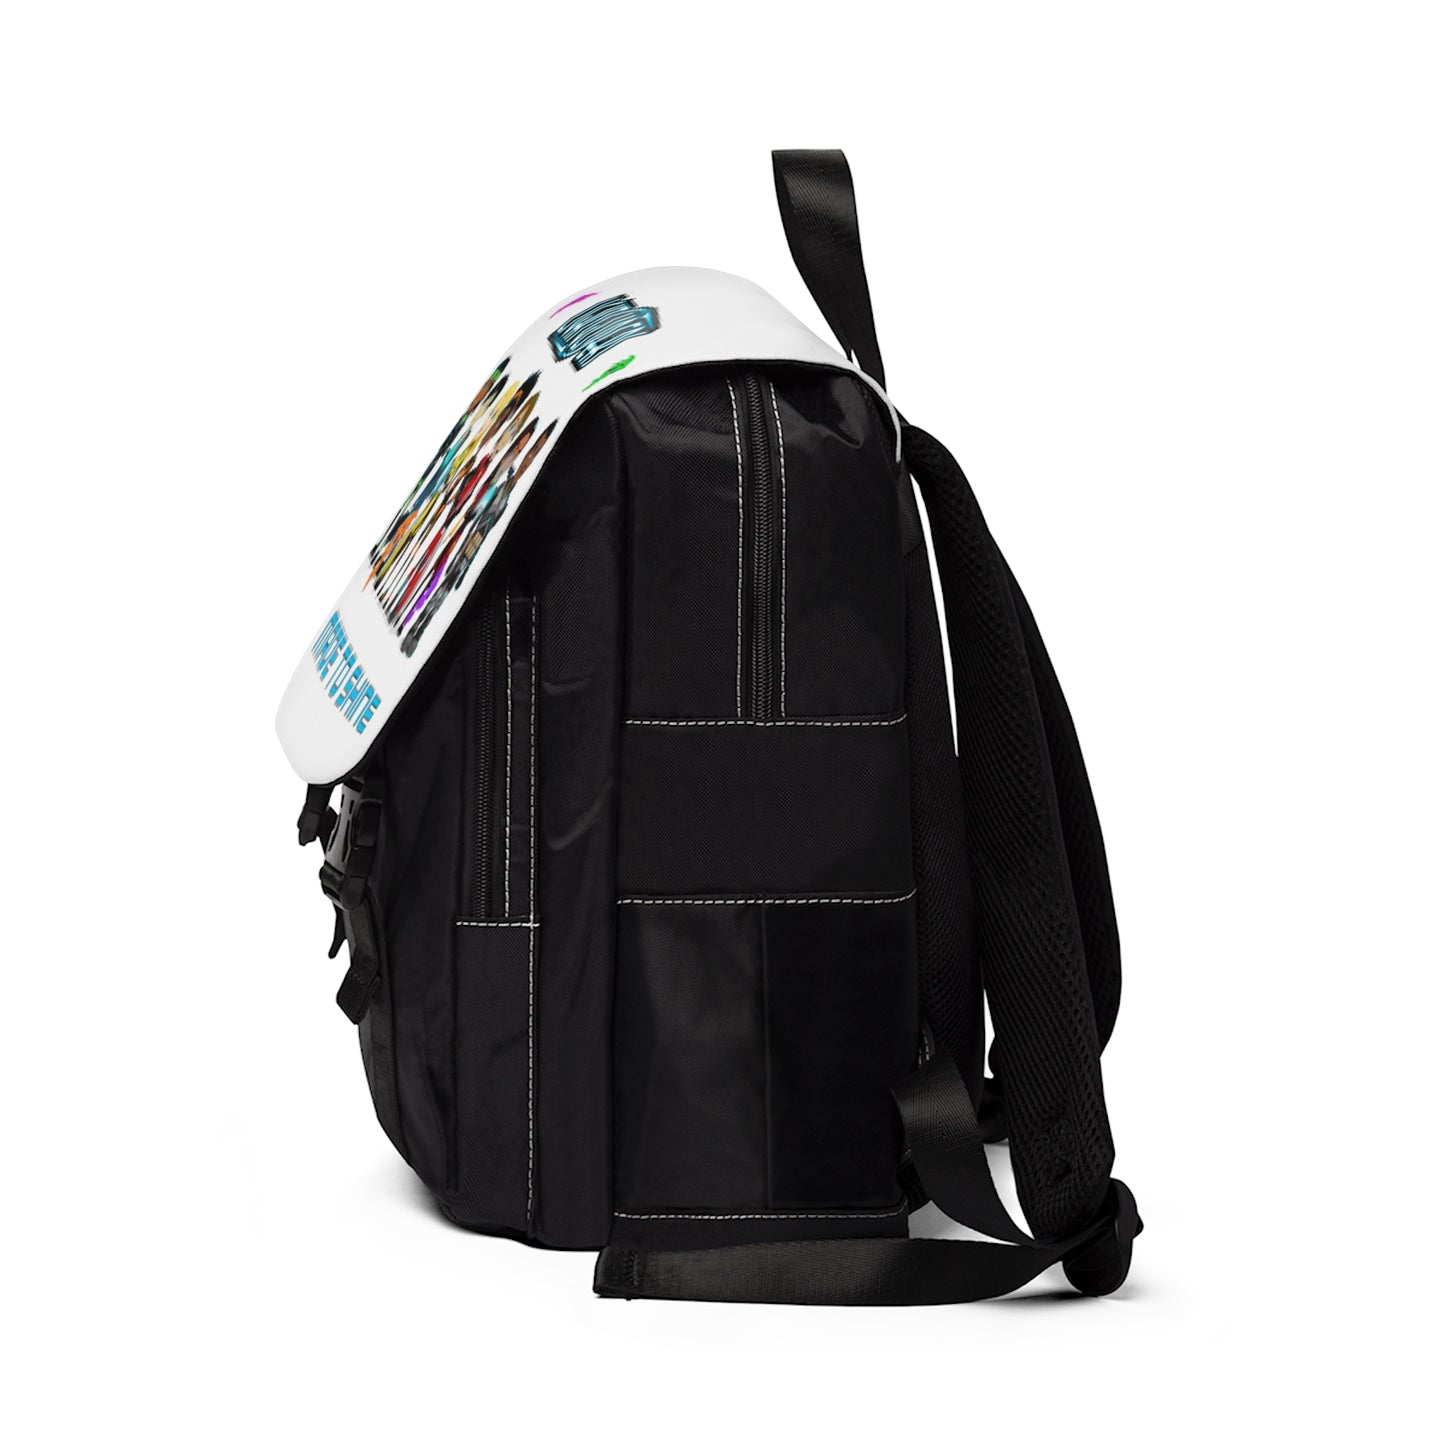 Backpack - Made to Shine